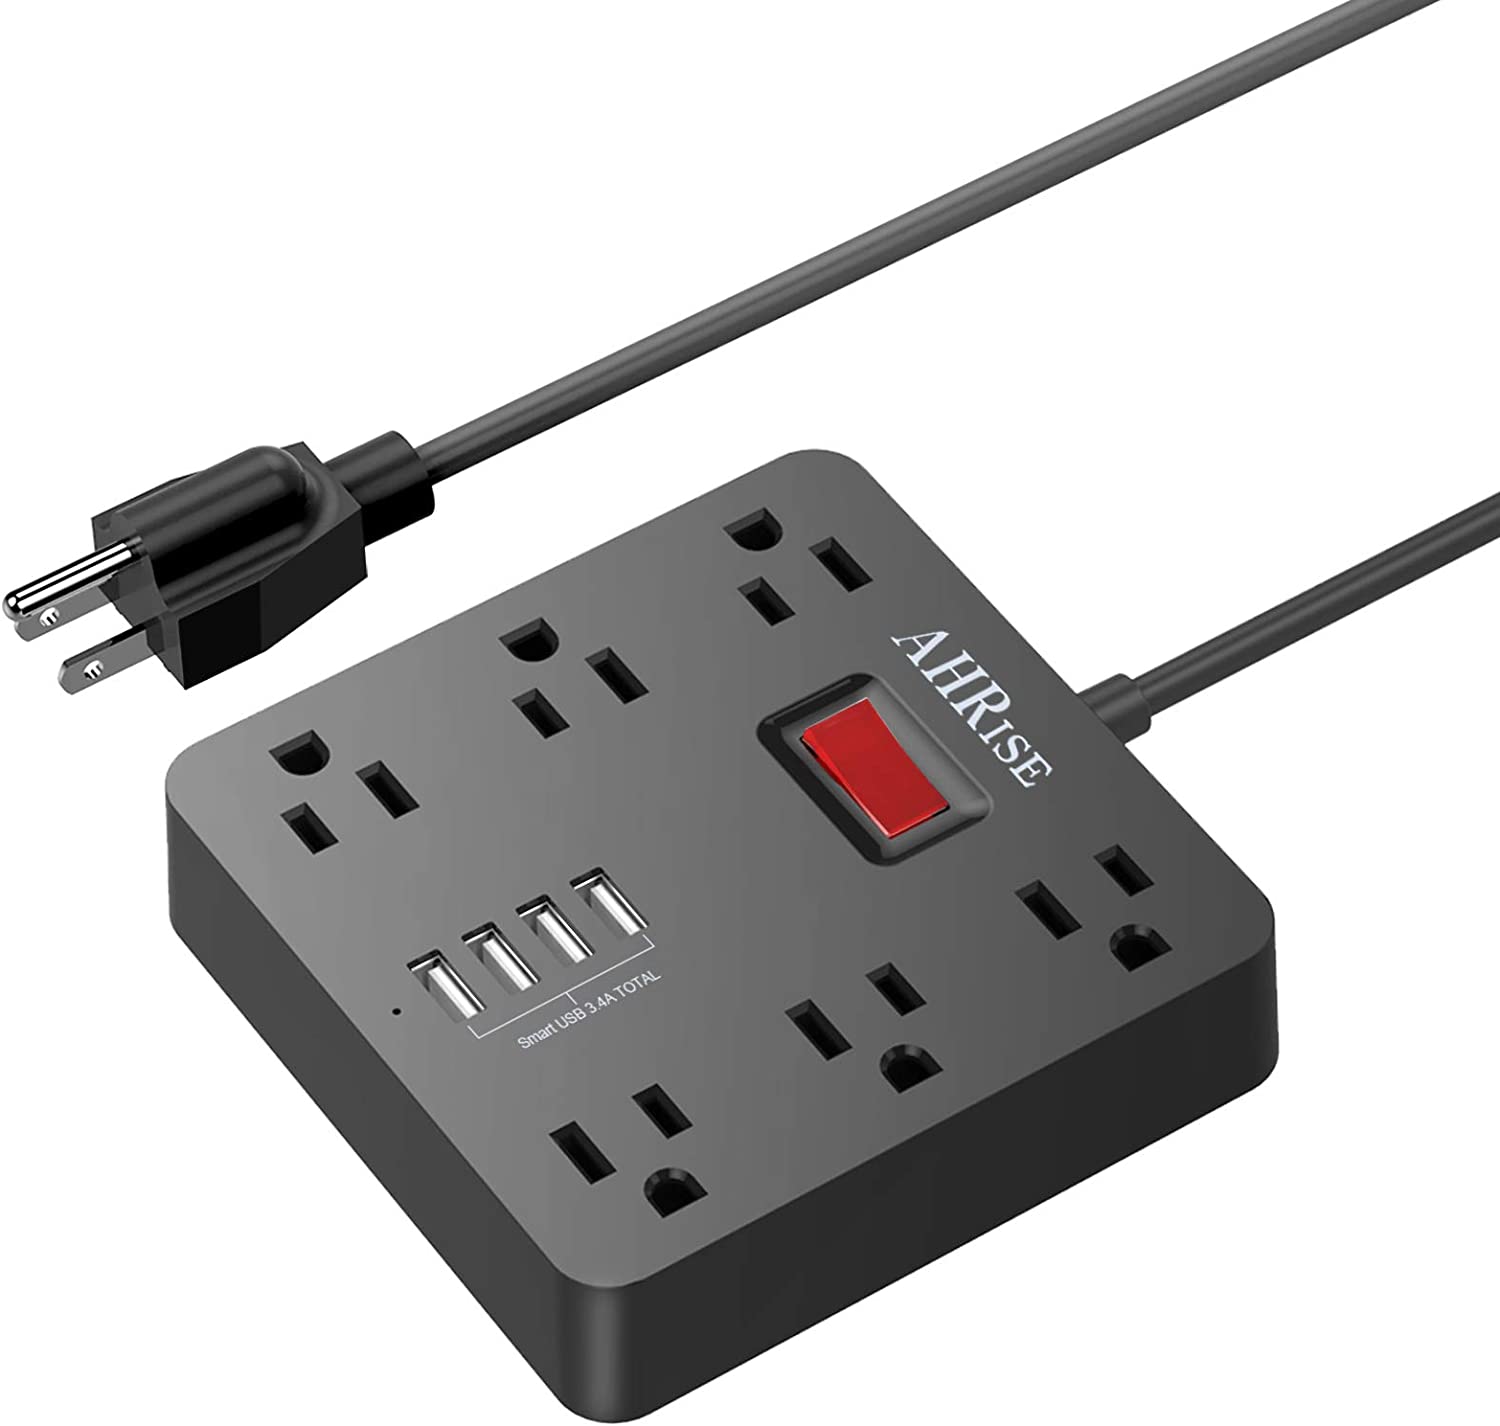  10. AHRISE Extension Cord Power Strip 